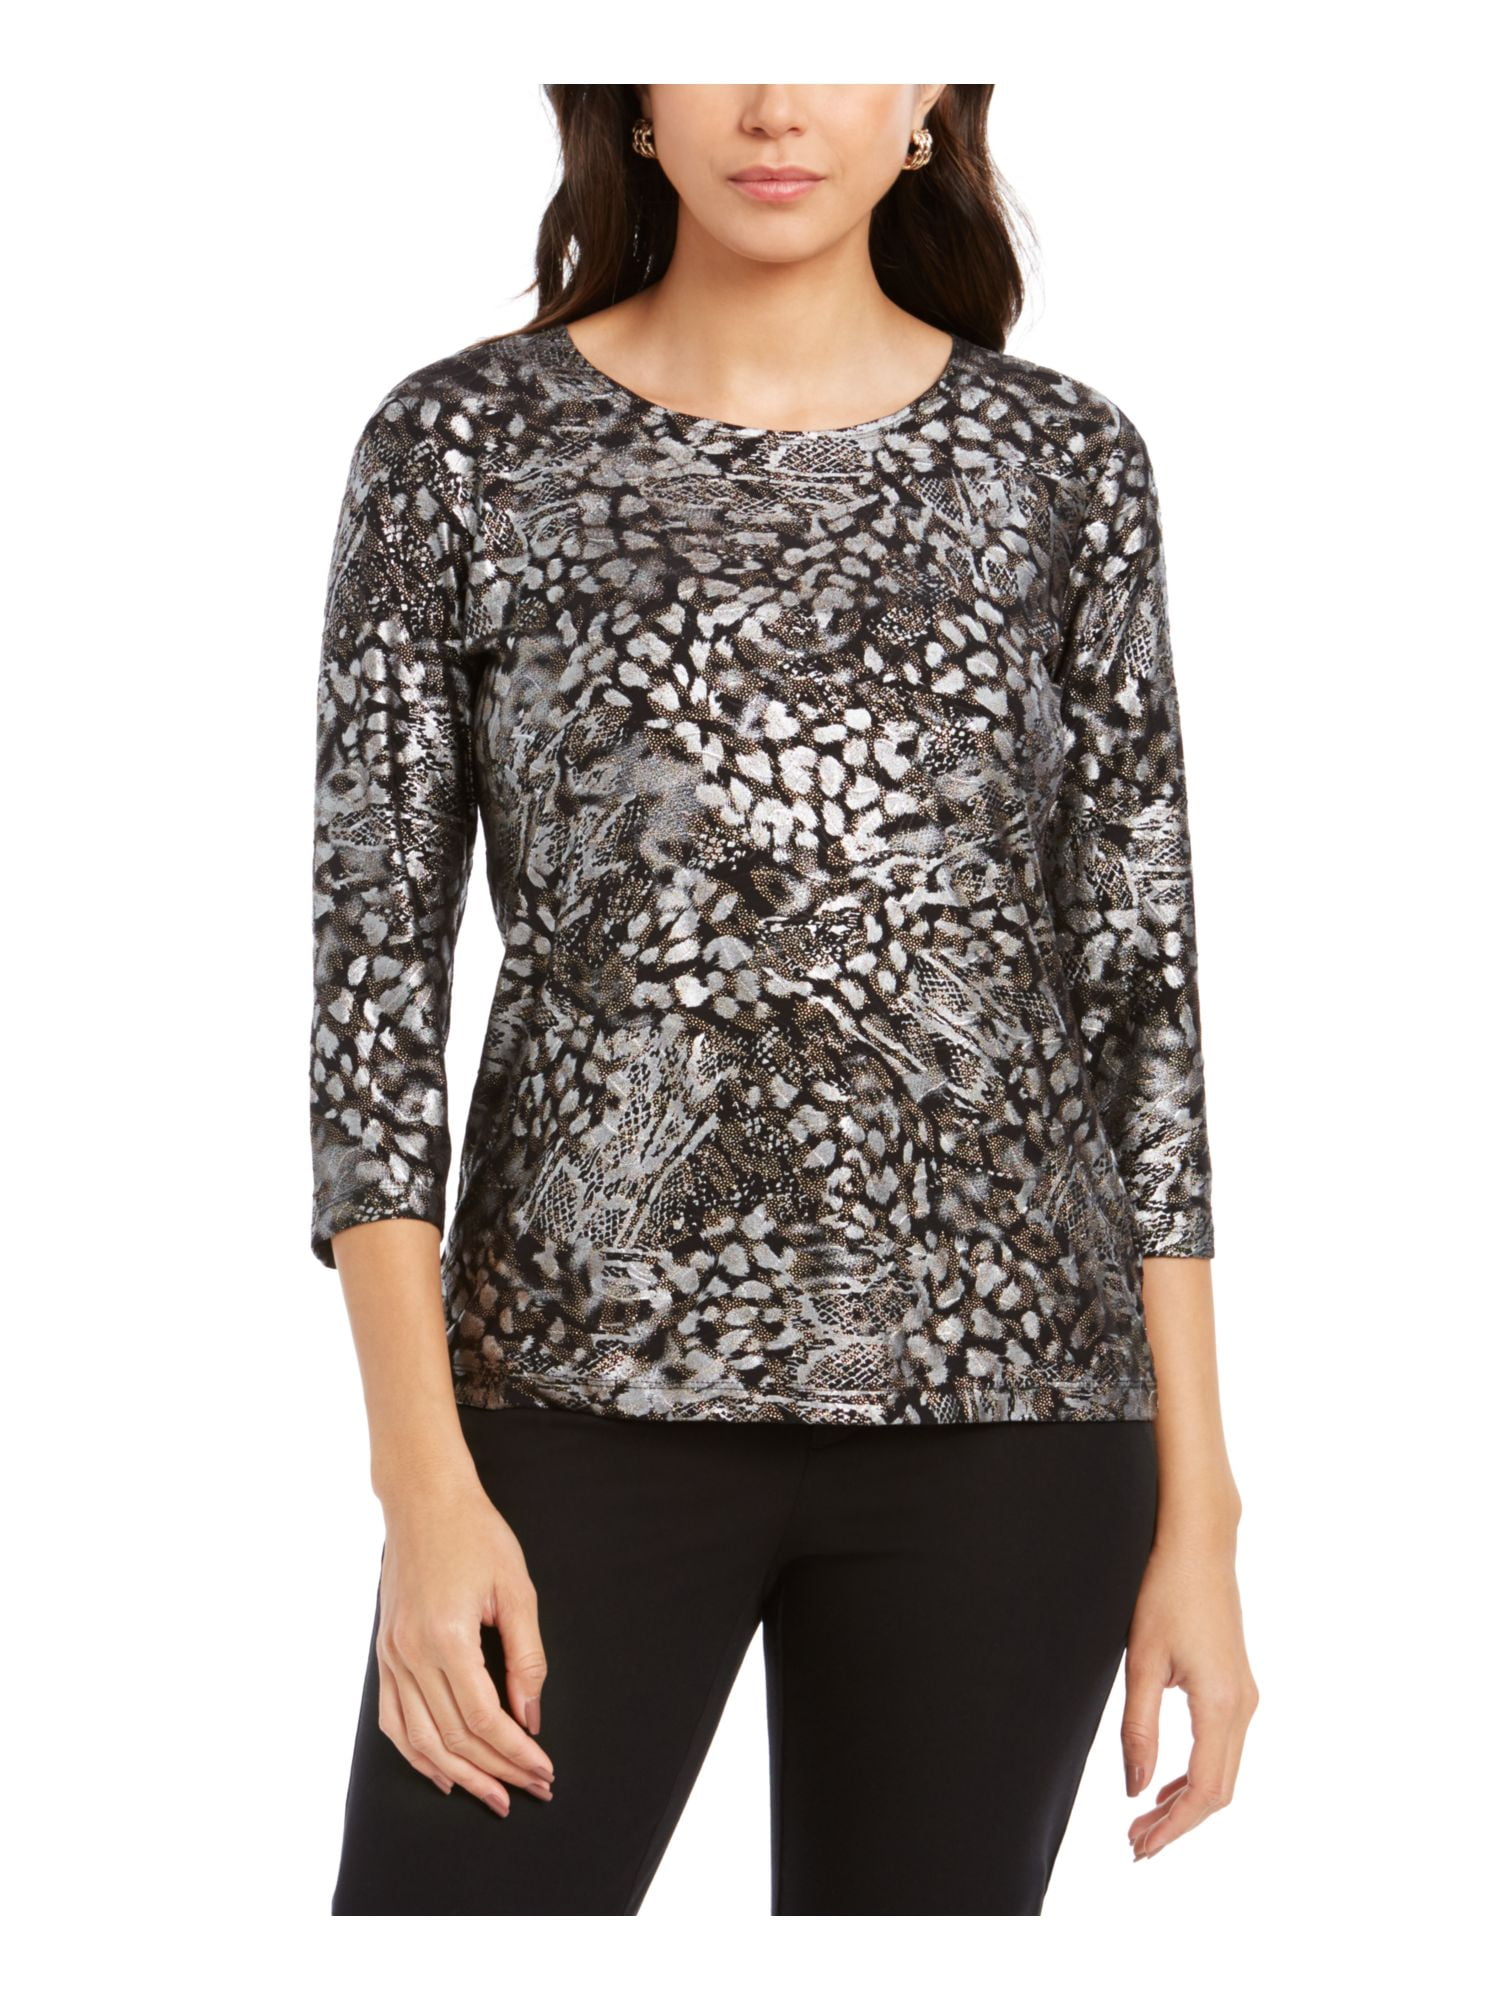 JM COLLECTION $44 Womens New Black Printed 3/4 Sleeve Evening Top PS ...